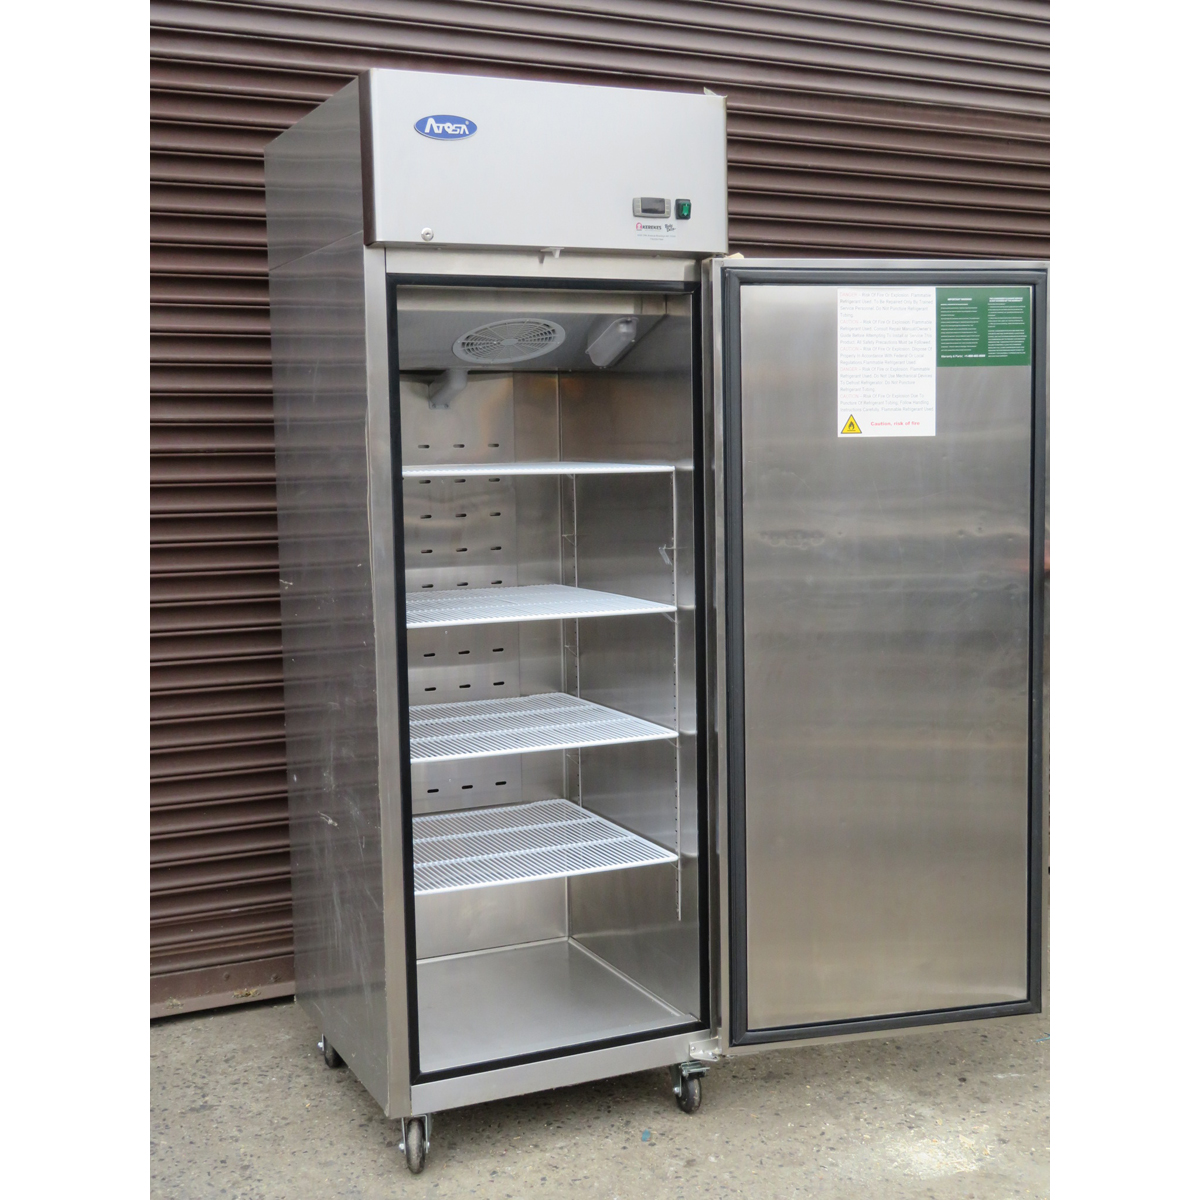 Atosa MBF8001 Freezer 28-7/10"W, 21.4 Cu. Ft., Used Excellent Condition image 2